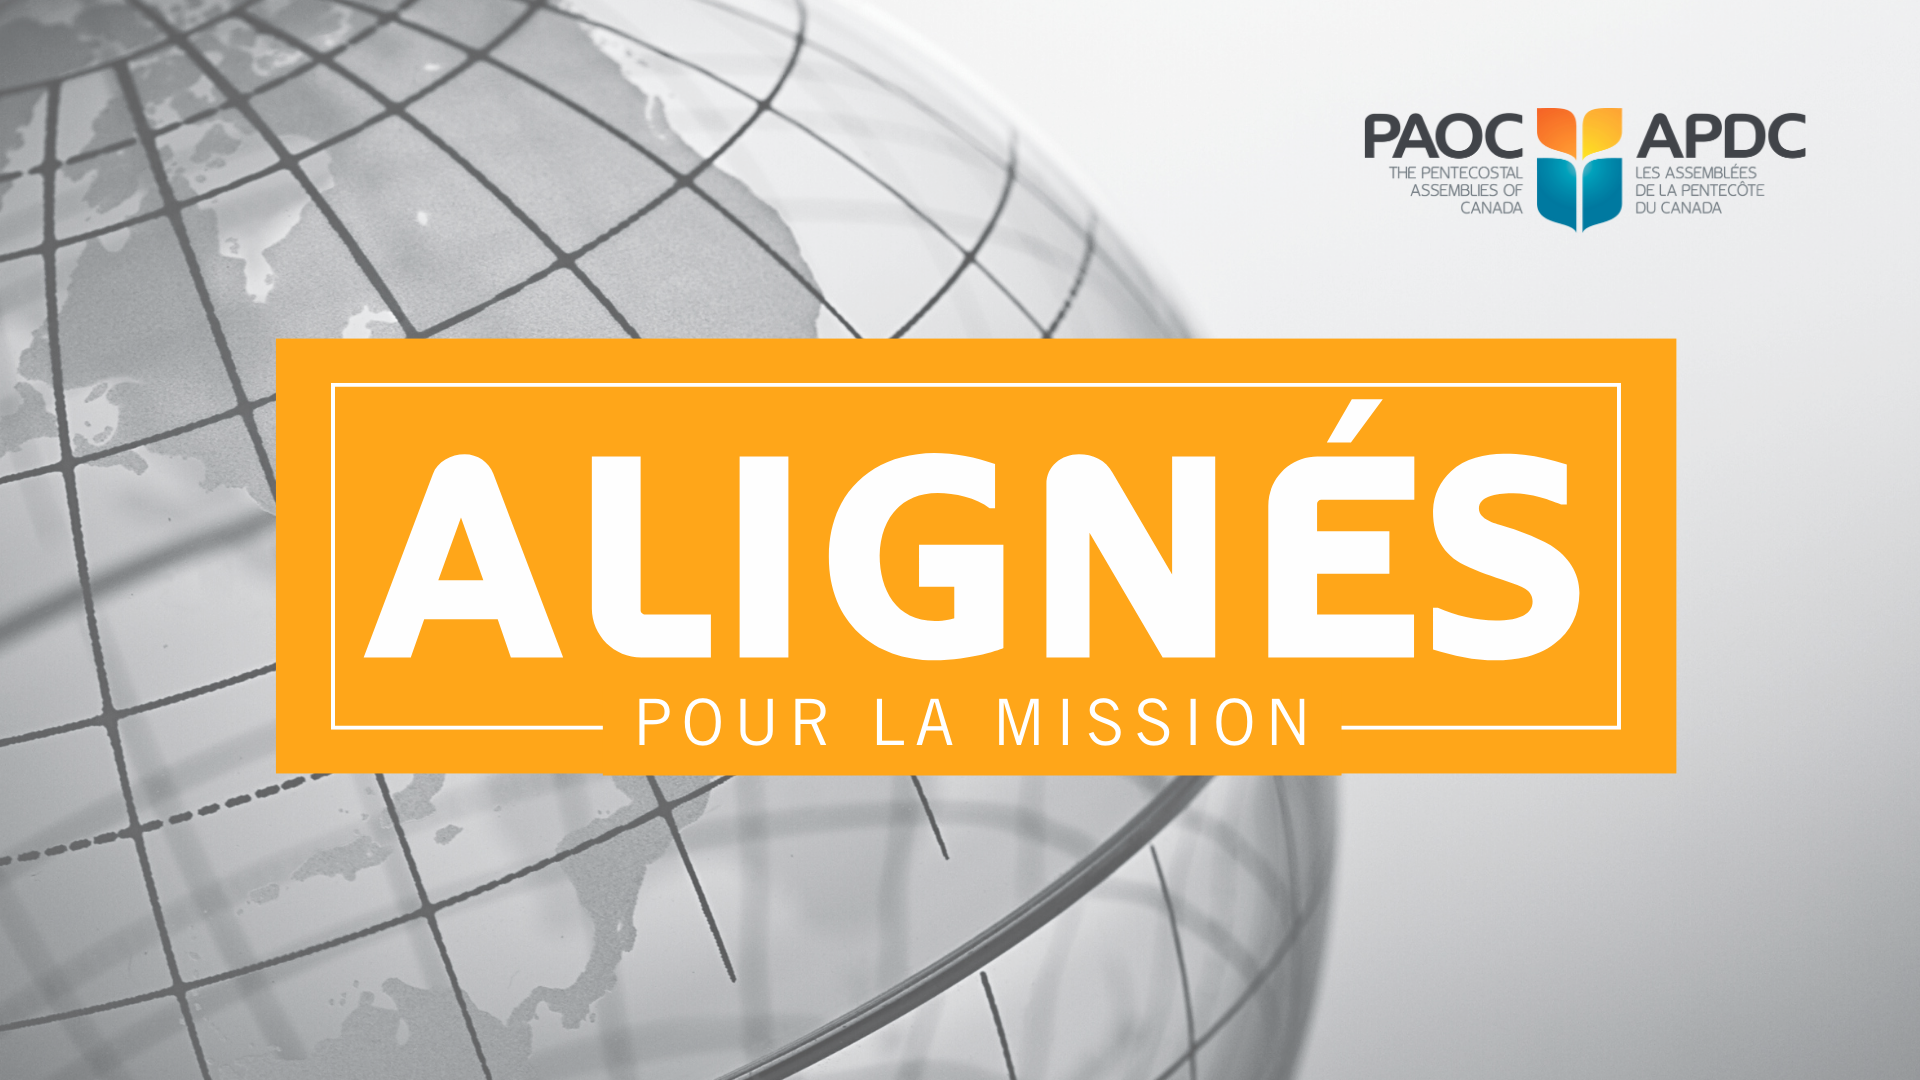 Aligned for Mission - PAOC full